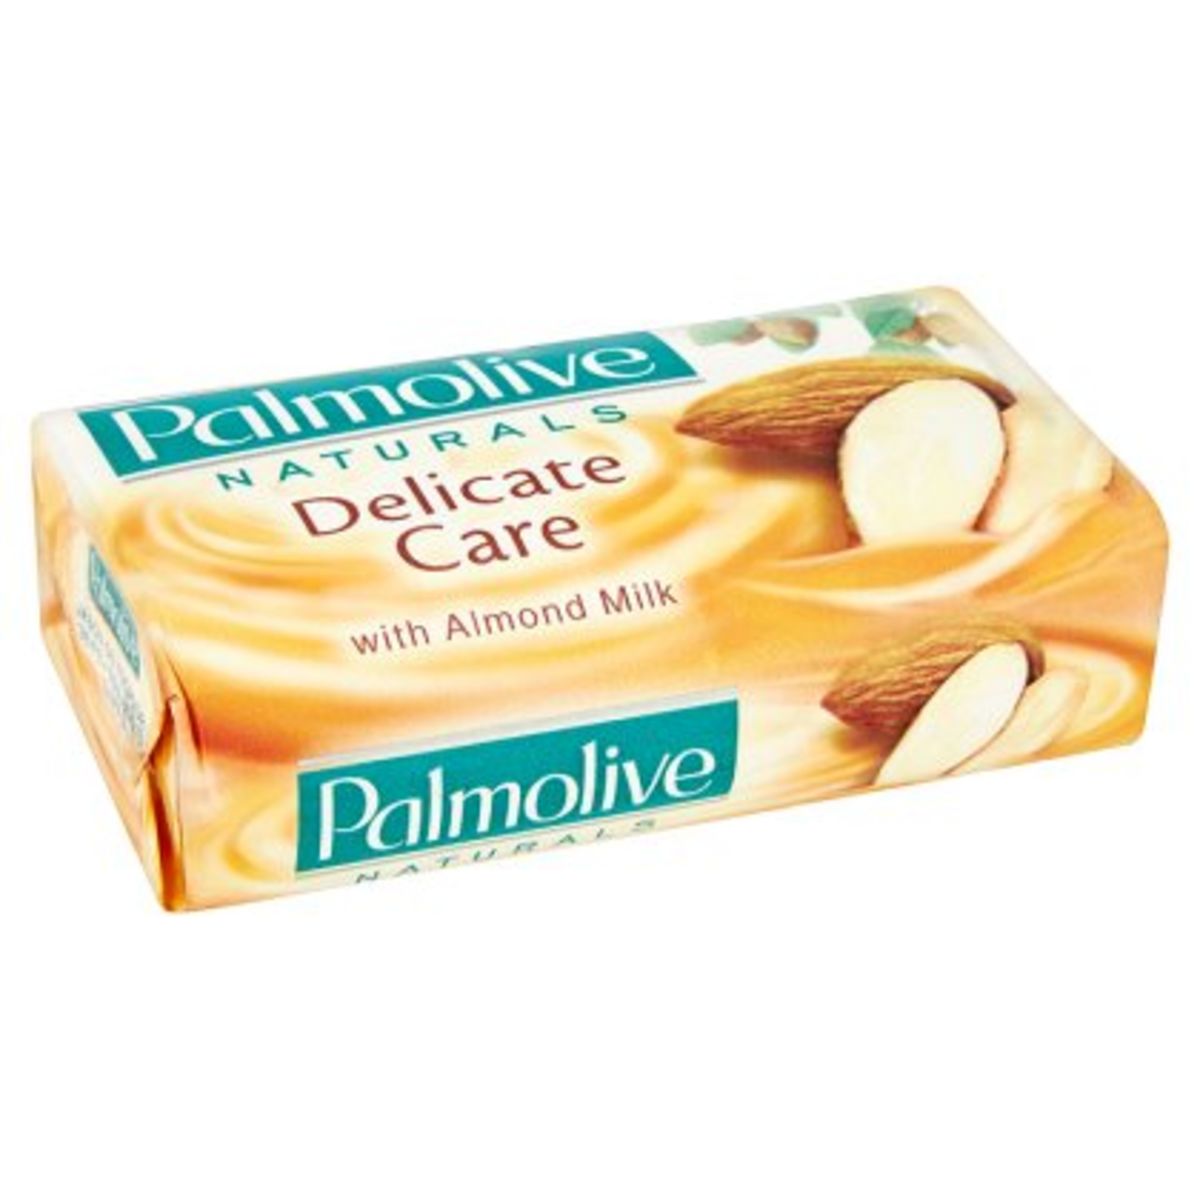 Palmolive Naturals delicate care with almond milk 90 g